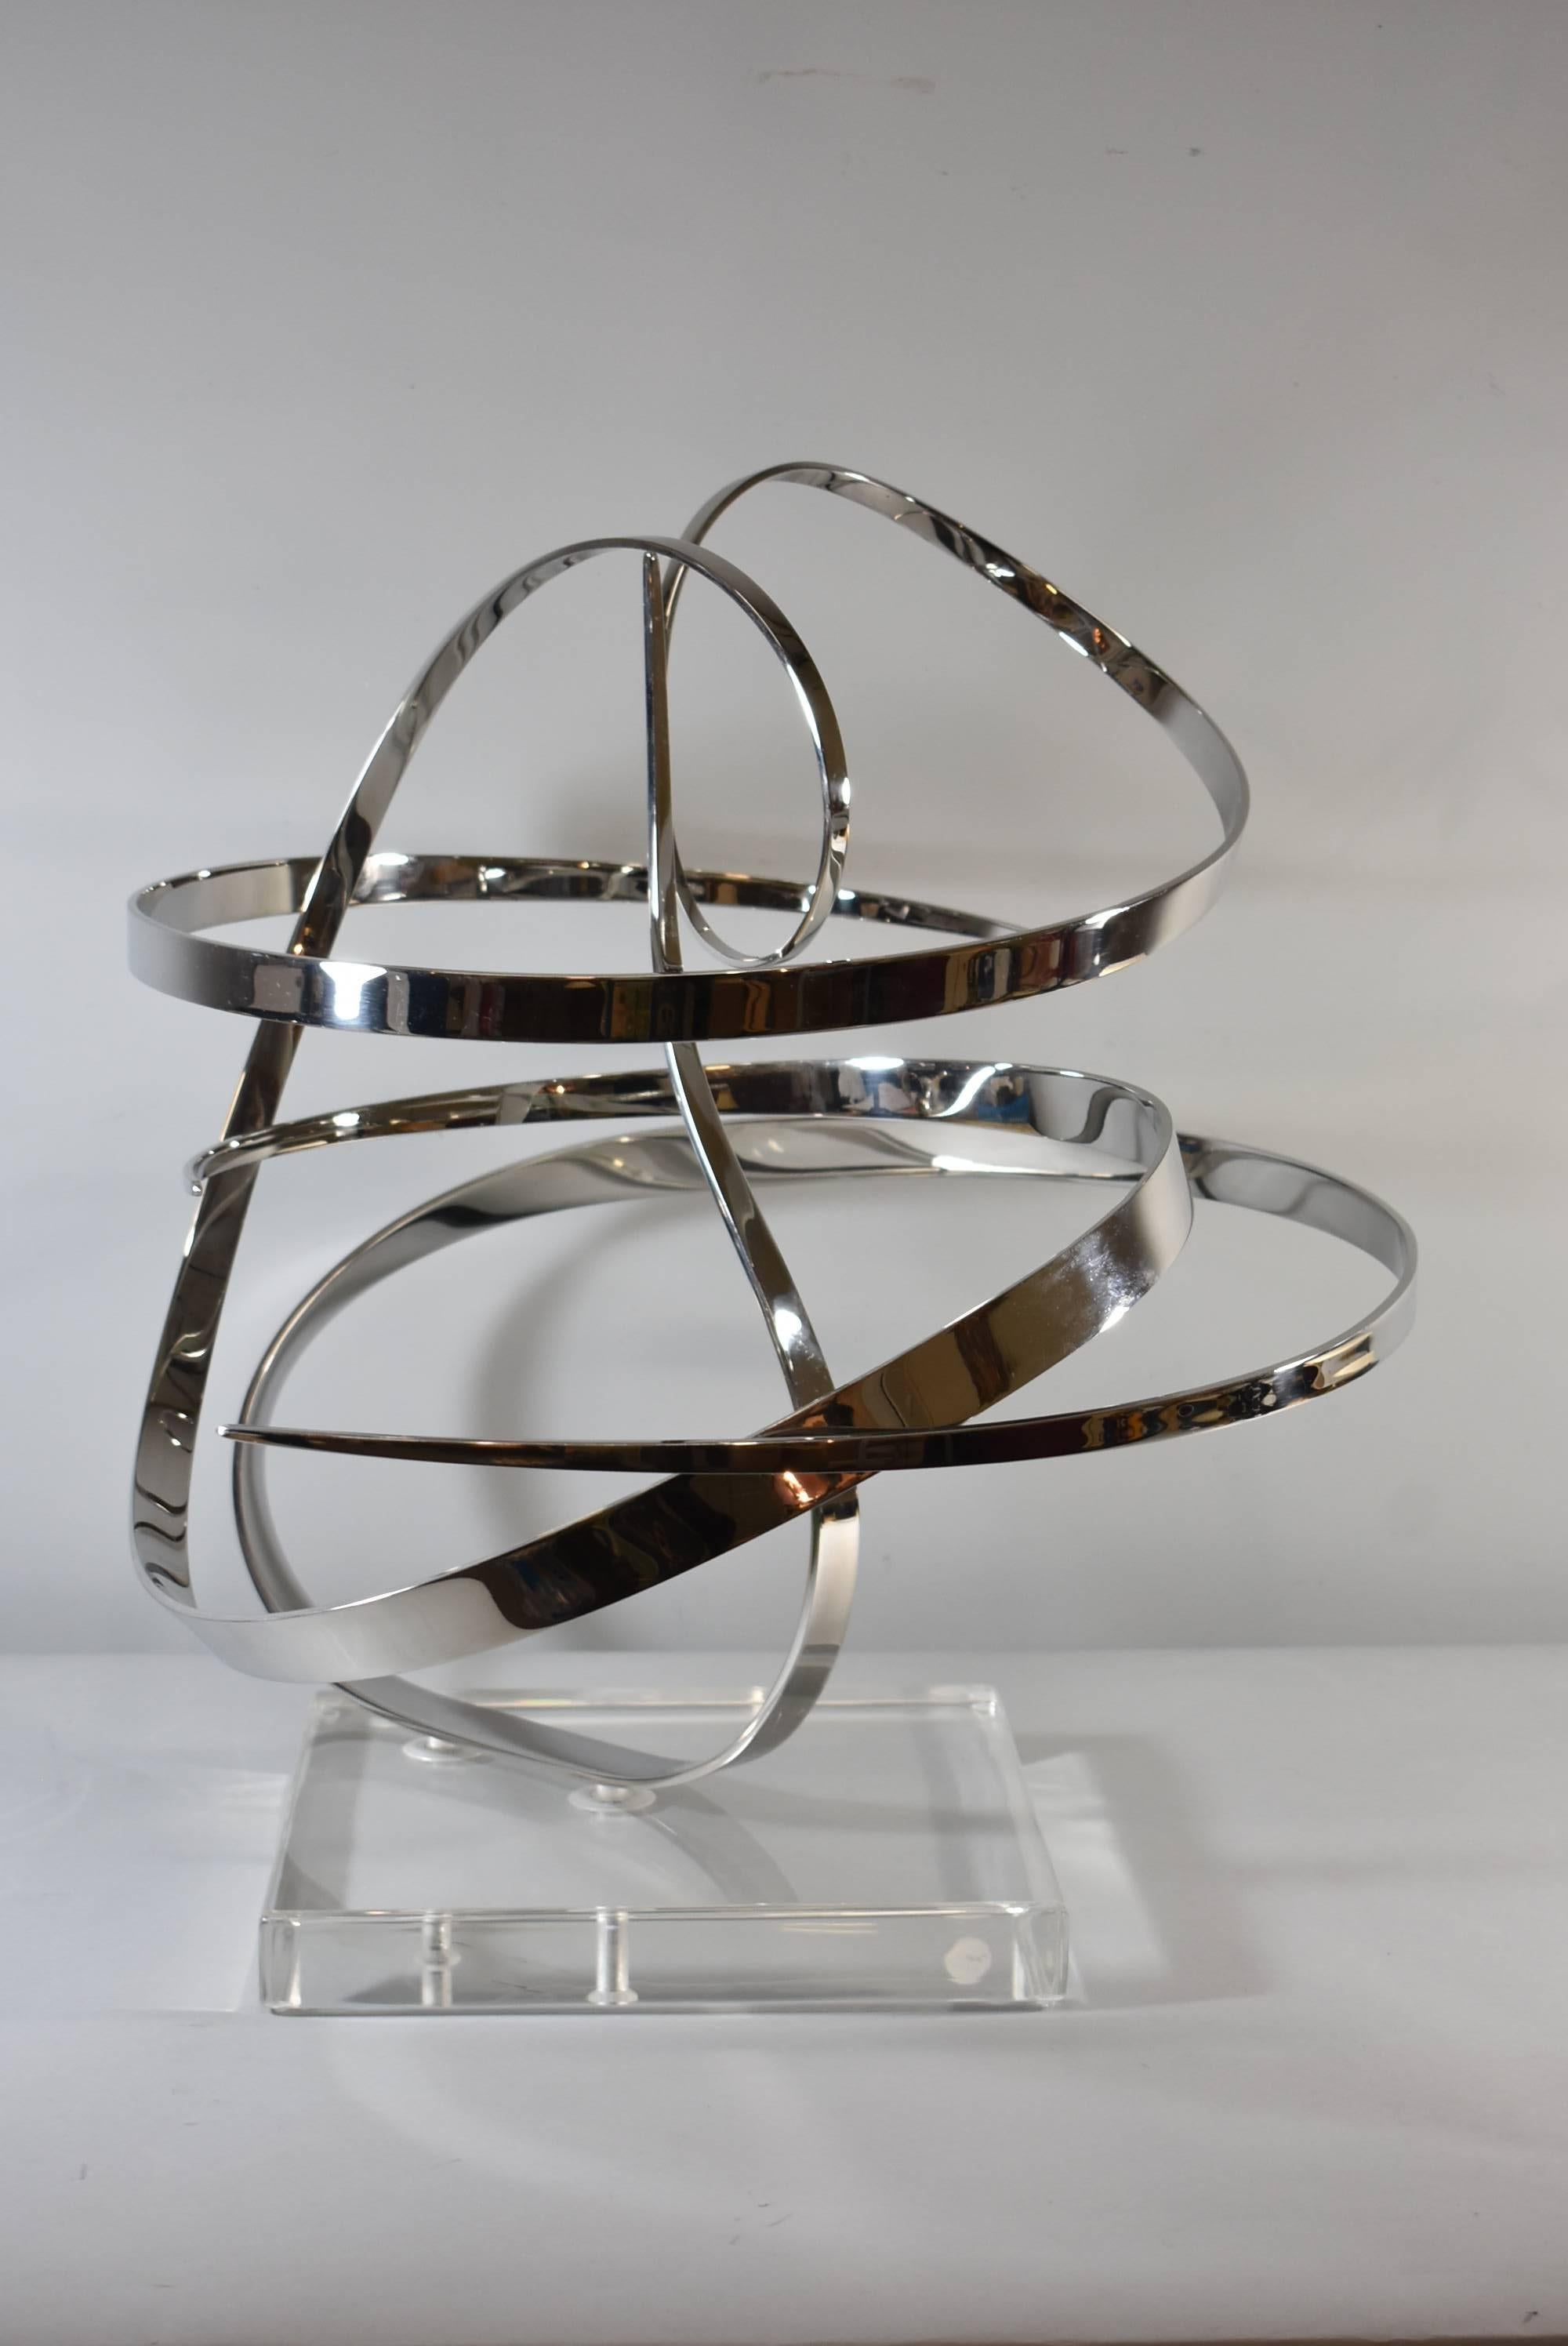 A fantastic modern Kinetic sculpture by George Beckman titled "Counterpoint". This polished stainless steel piece sits upon a Lucite base. George Beckman is an American Artist who over the last 3 decades has created many unique sculptures.